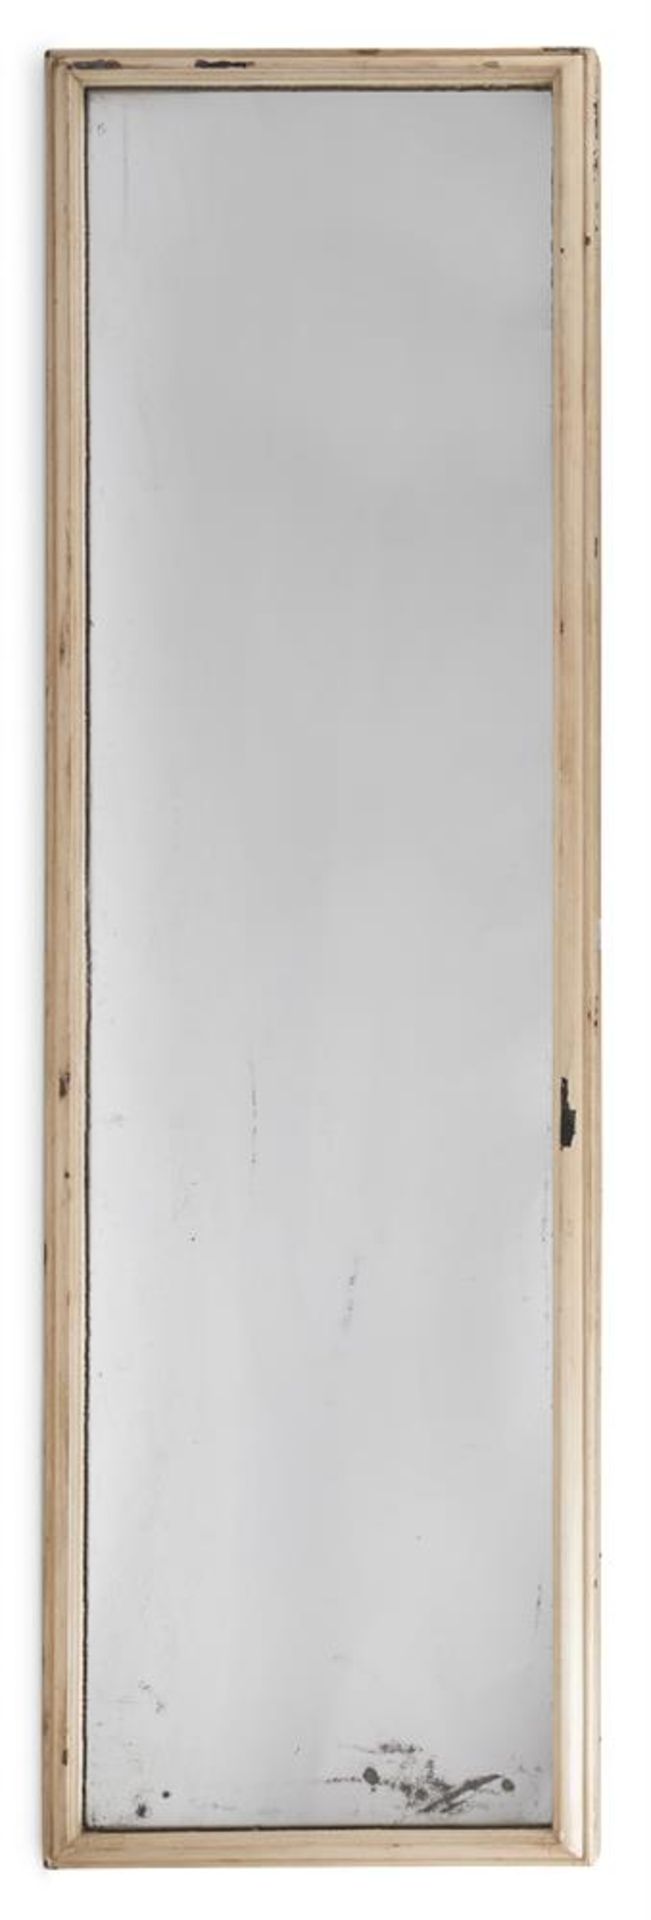 TWO SIMILAR CREAM PAINTED PINE WALL MIRRORS, 19TH CENTURY AND LATER